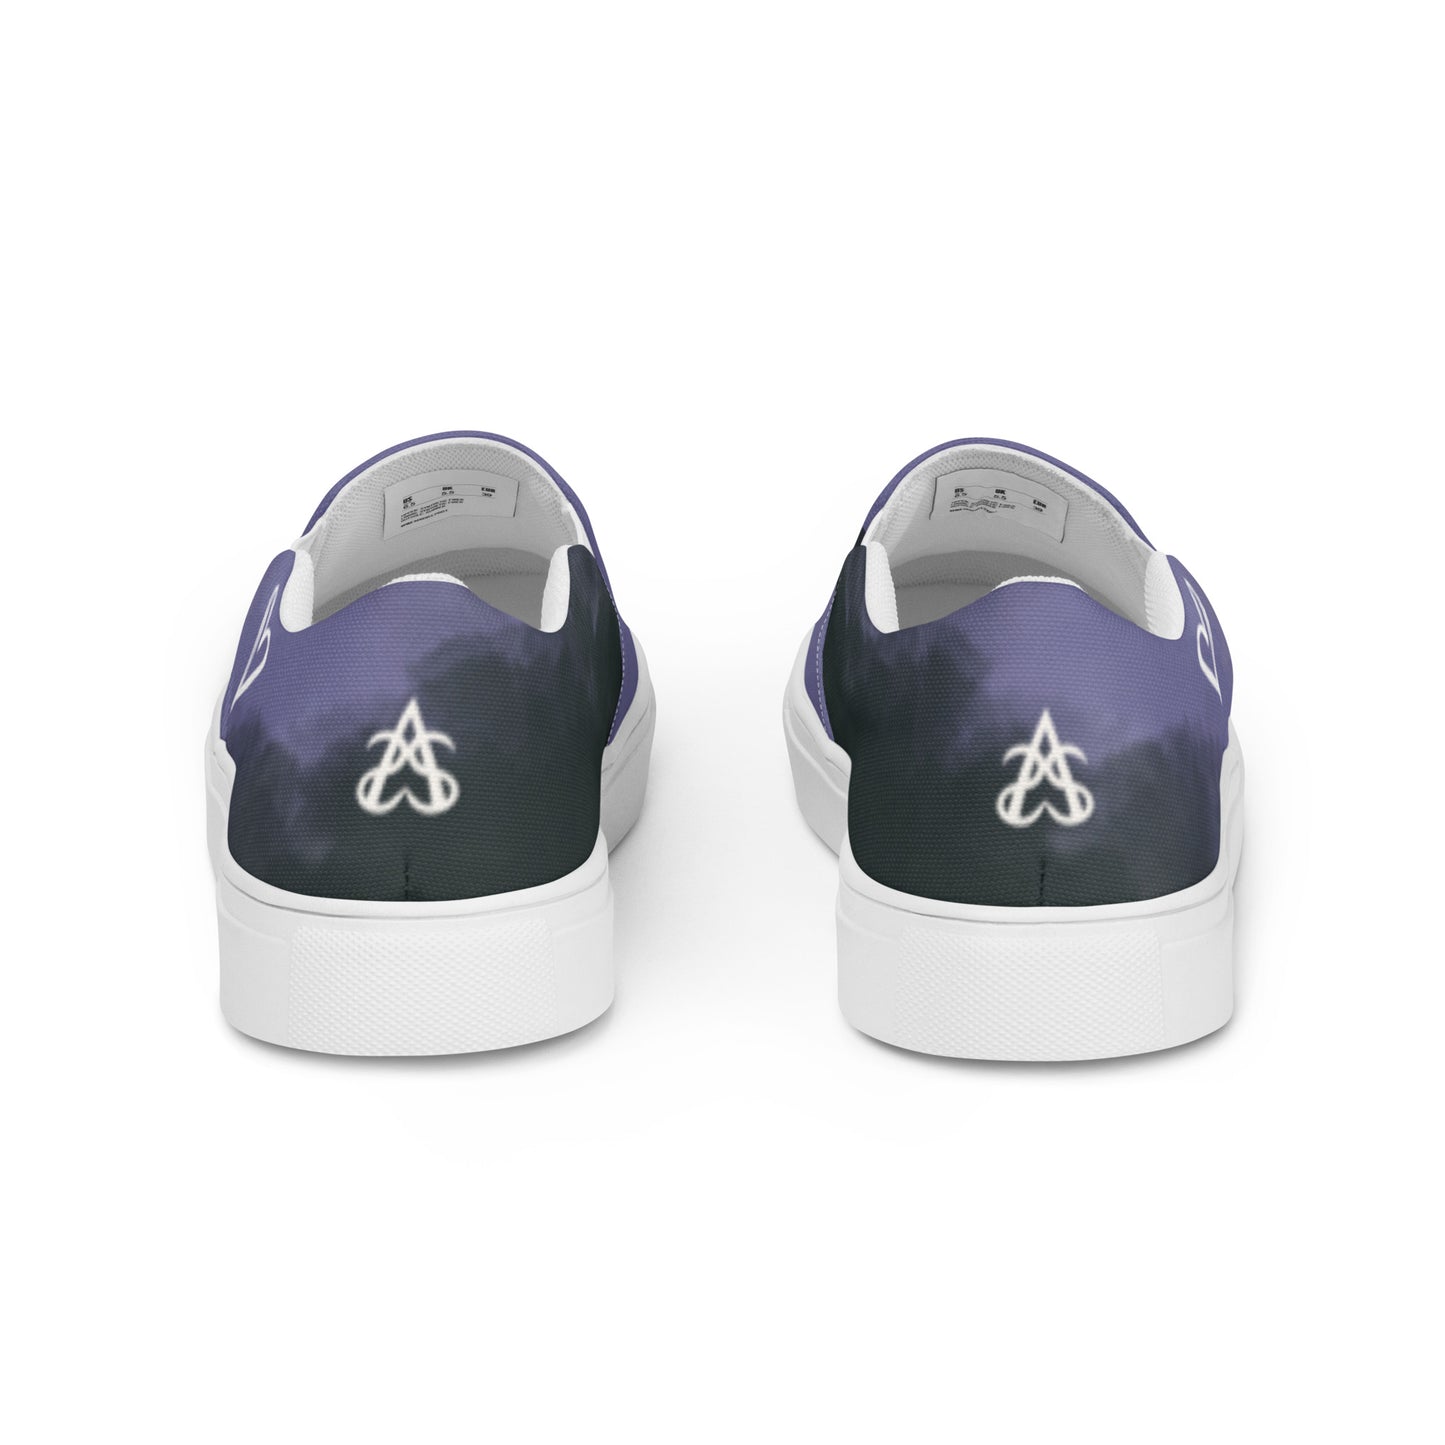 Back view: A pair of slip-on shoes with the non-binary colors in wisps of clouds and the Aras Sivad Studio logo in white on the back.